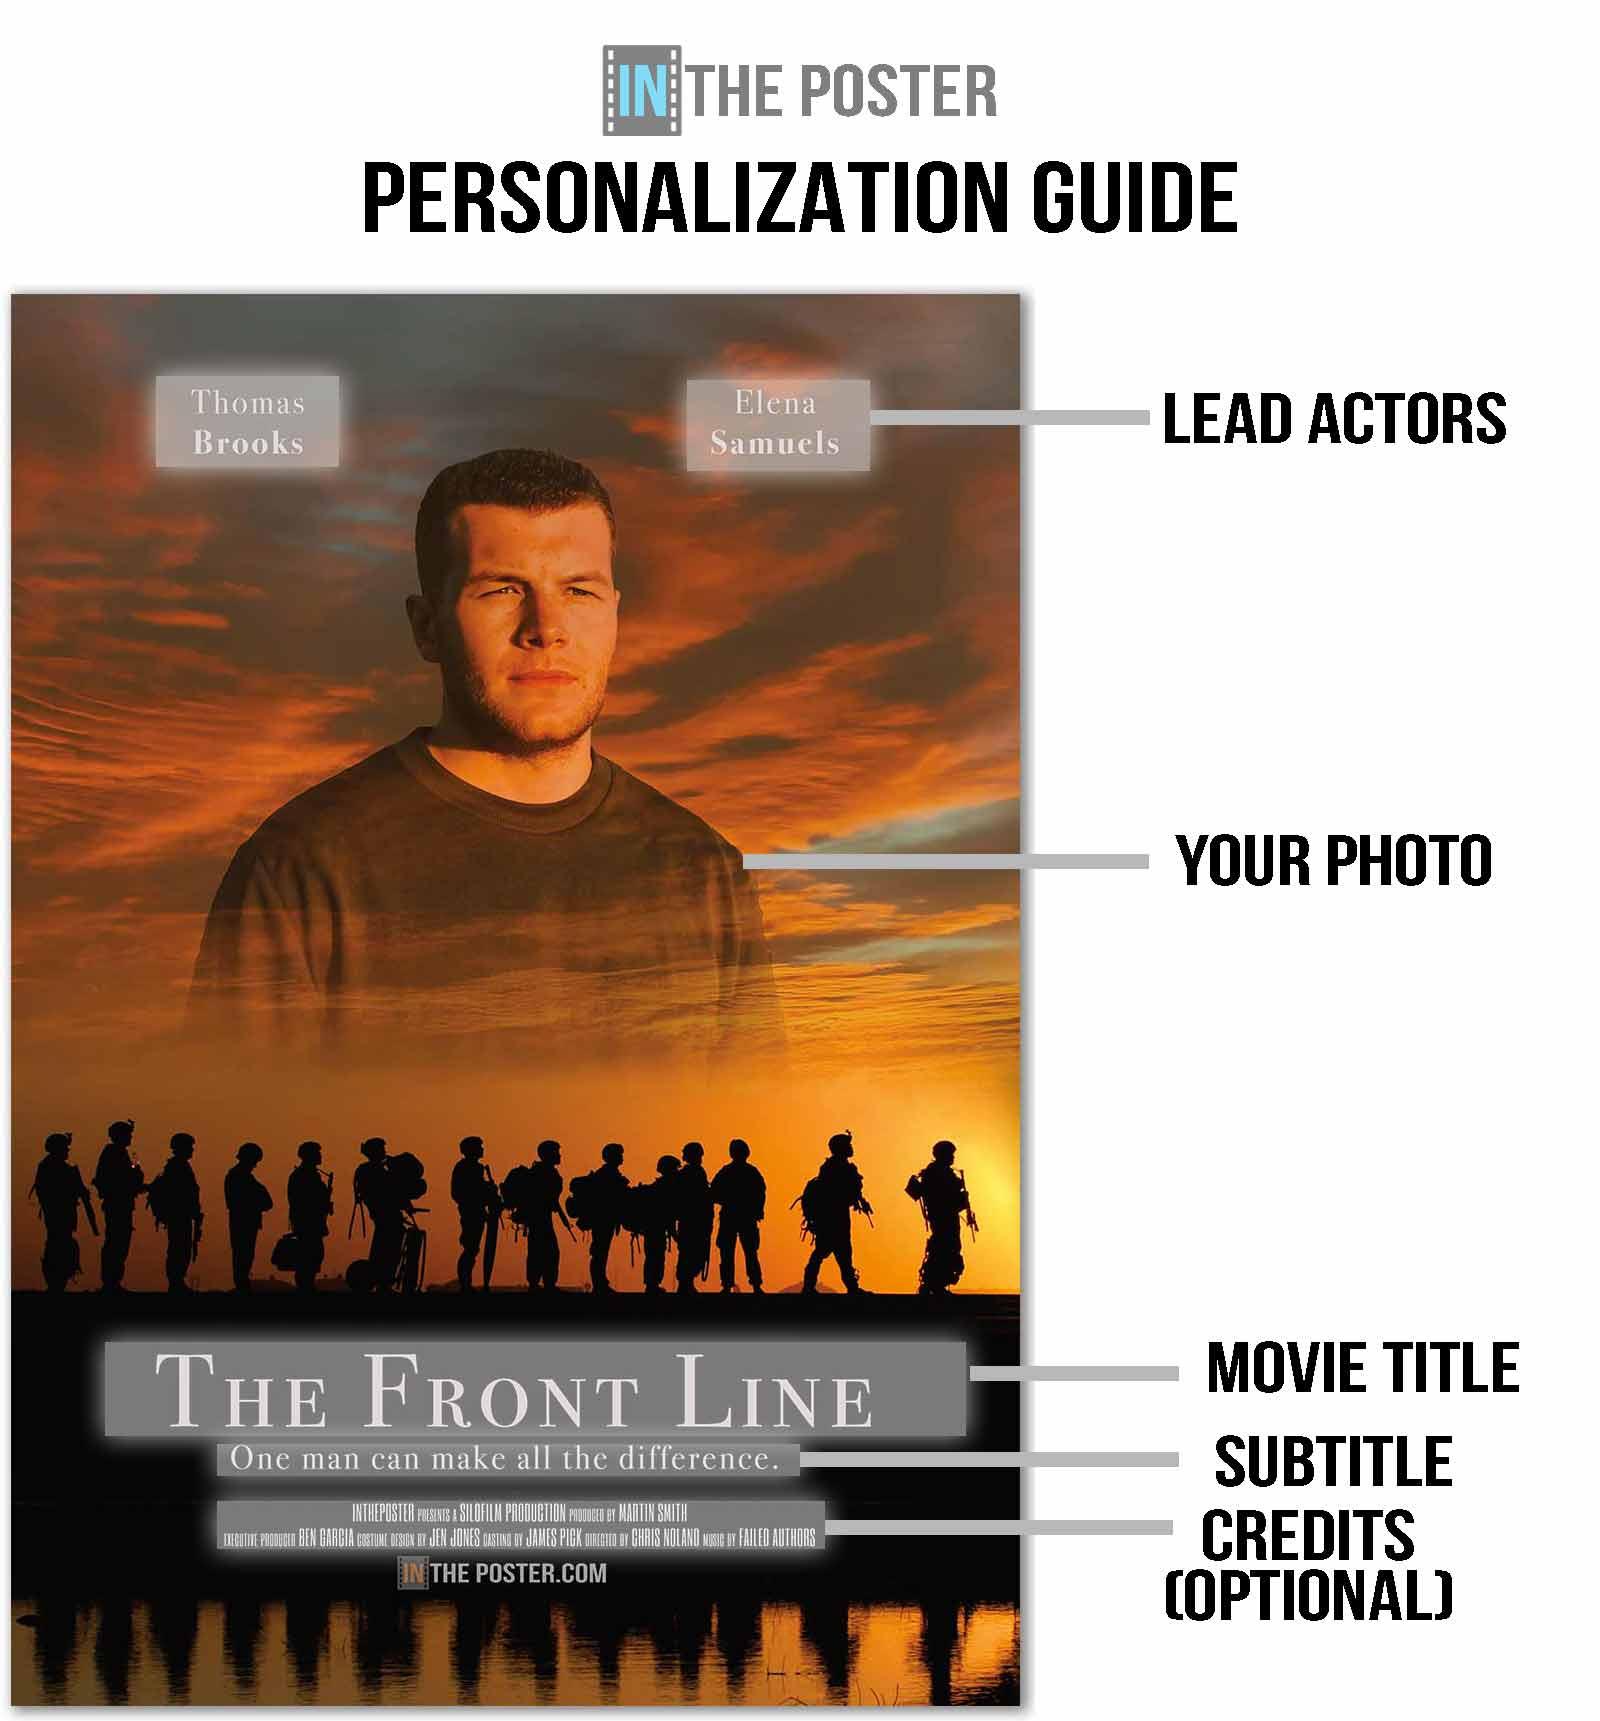 A diagram showing how to personalize the War movie poster design